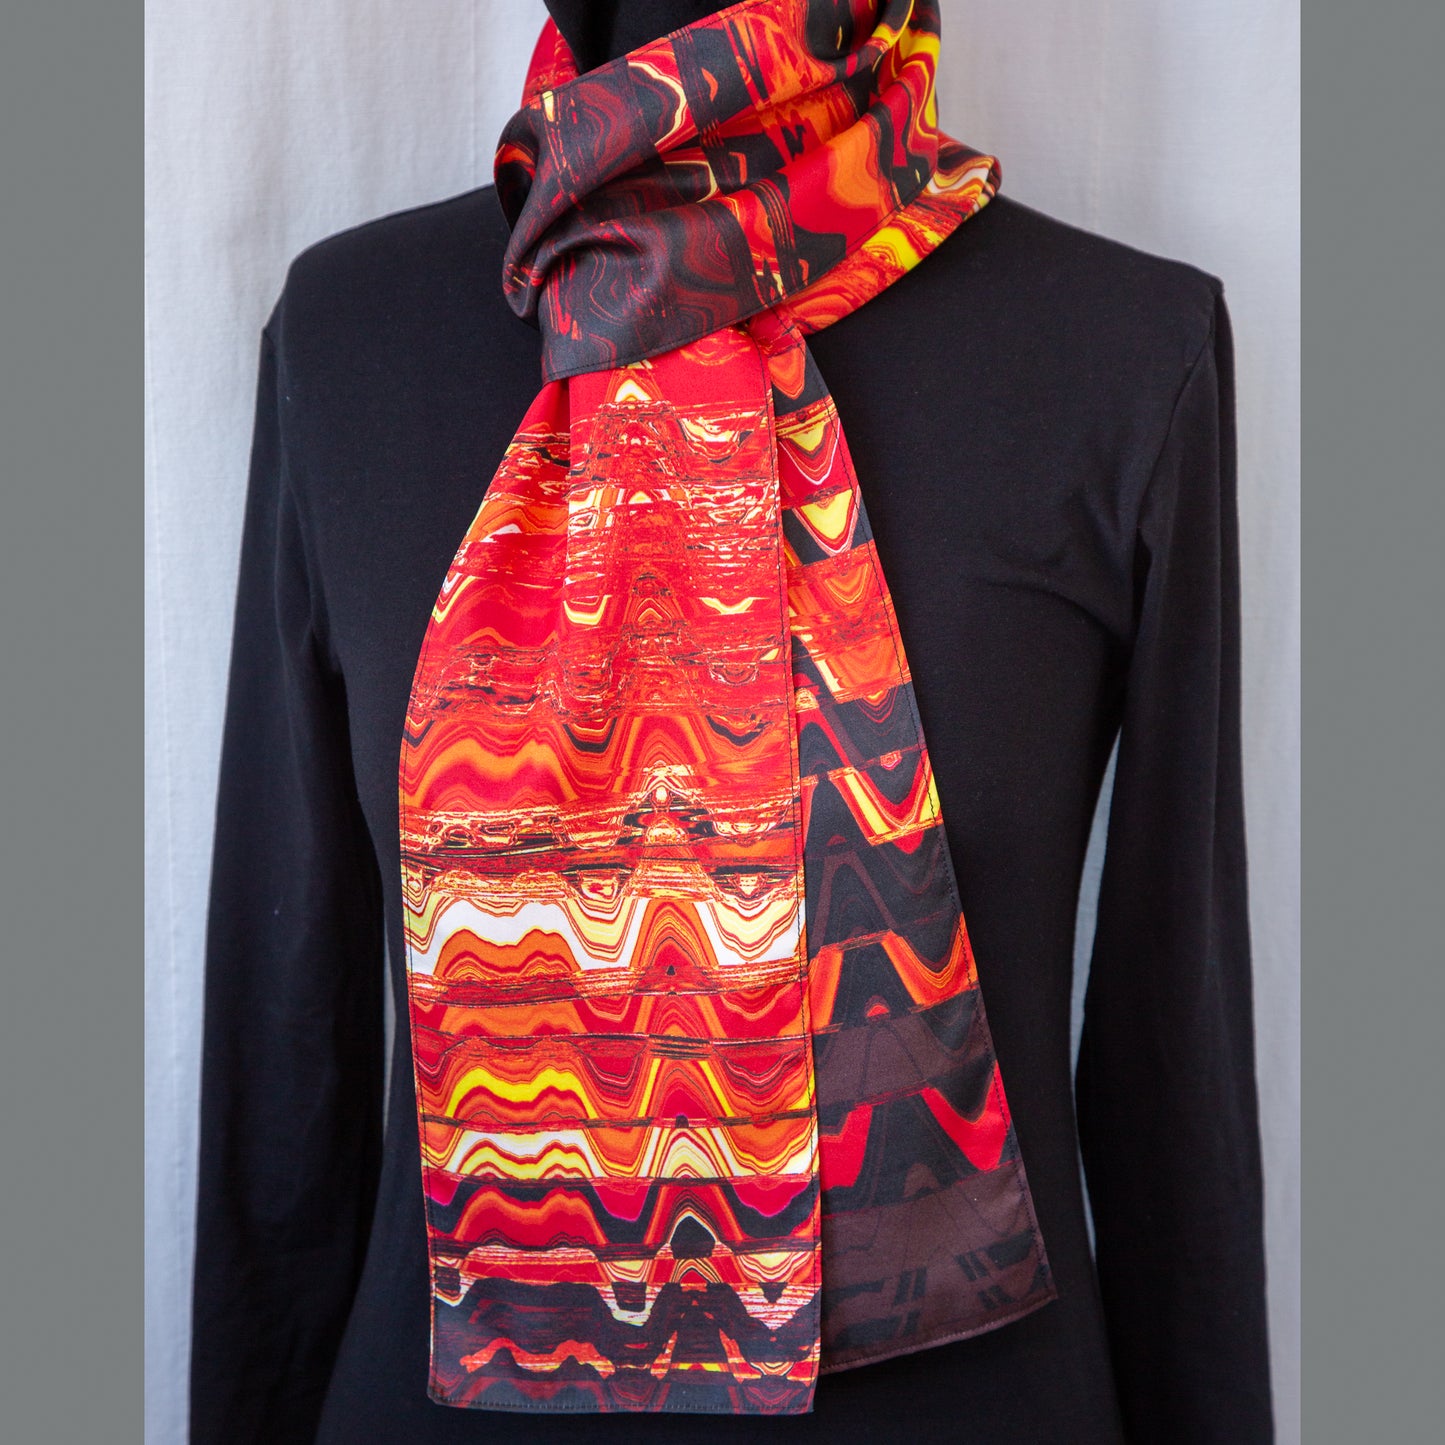 Red, Orange, Yellow, Black Abstract Print Silk Charmeuse Scarf - Fire Waves "Lava"